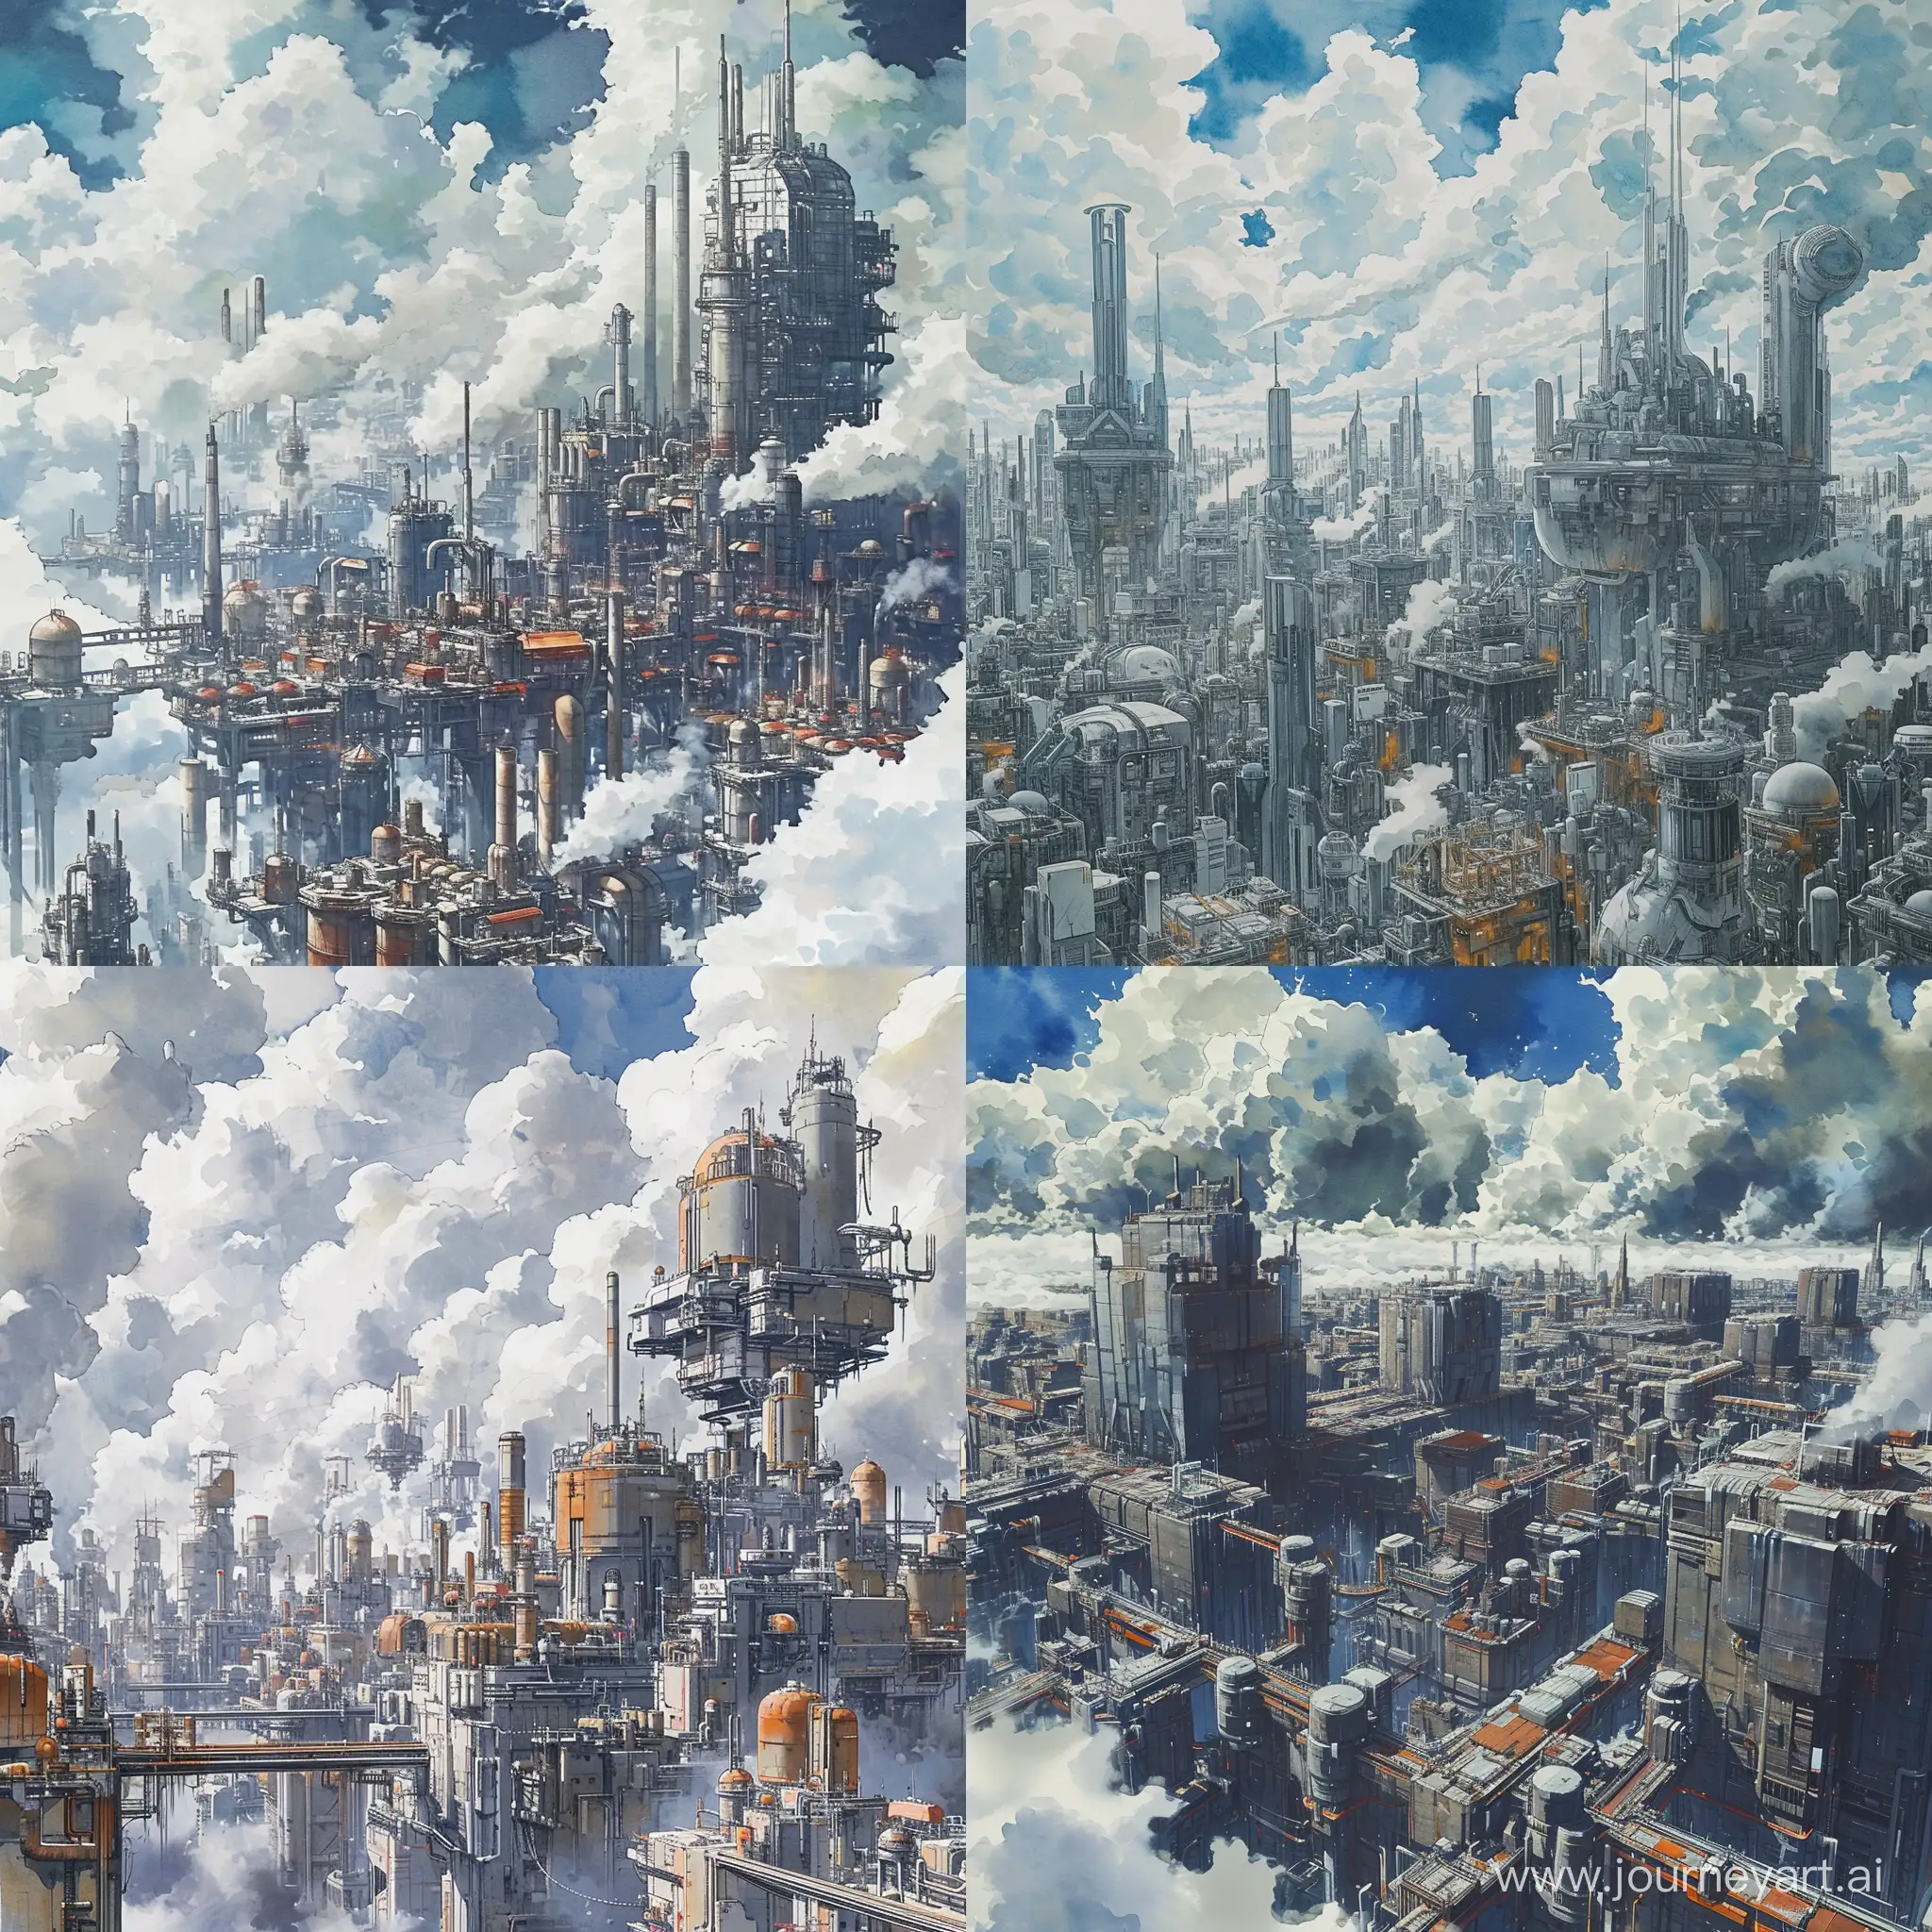 A massive futuristic city with buildings made of metal and lots of factories, cloudy skies, anime, watercolor